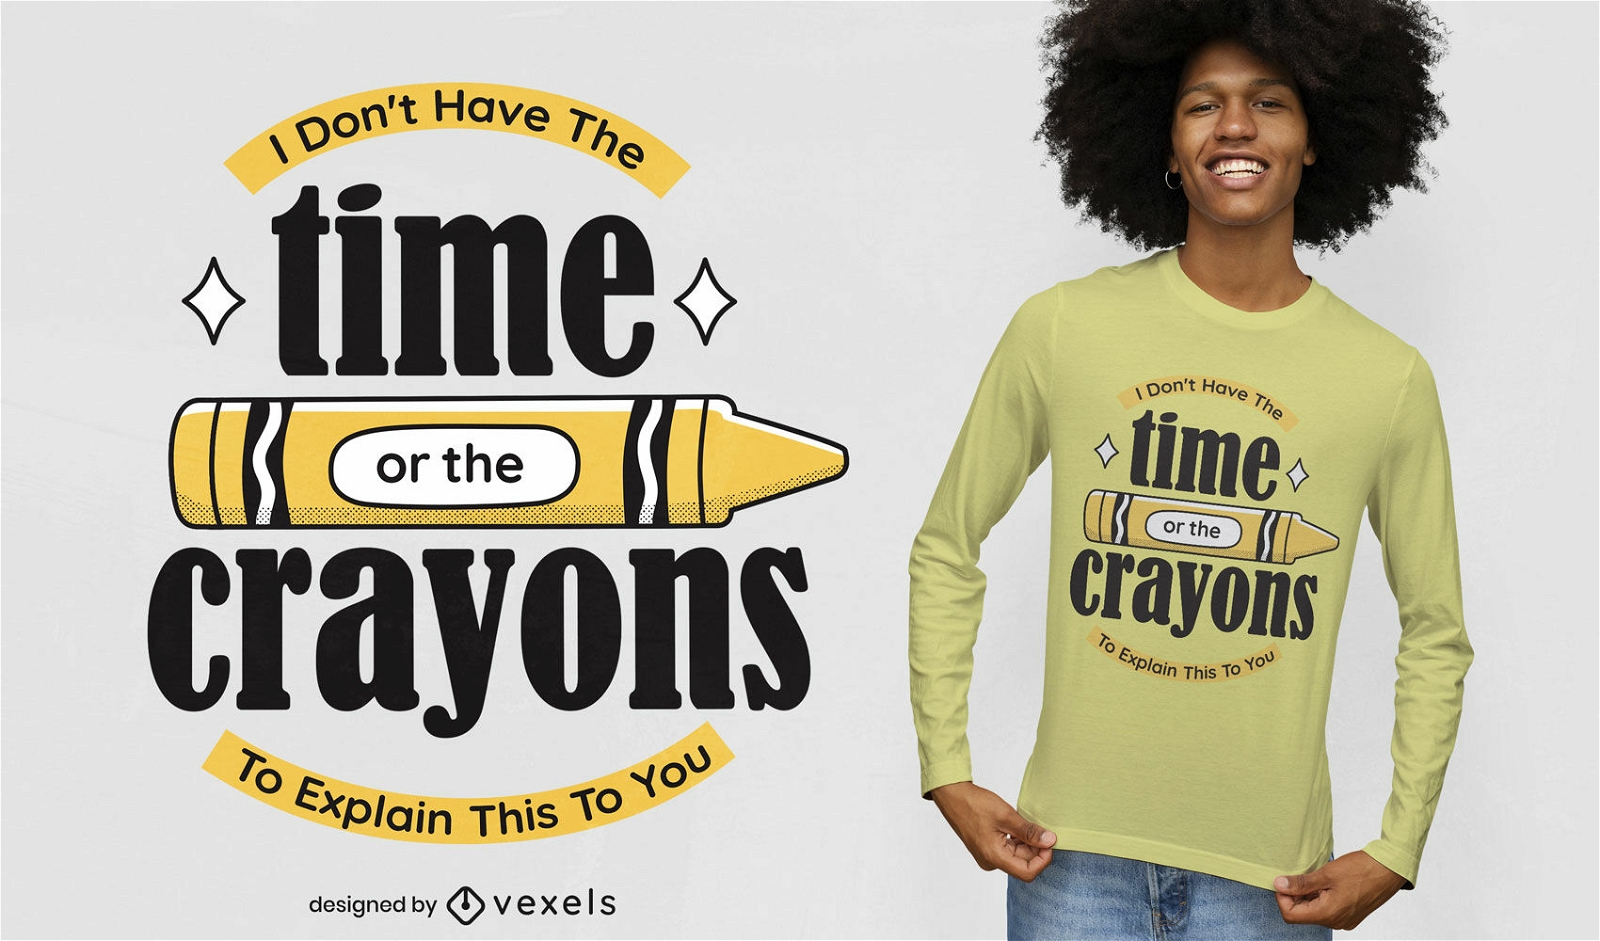 Crayons funny quote t-shirt design